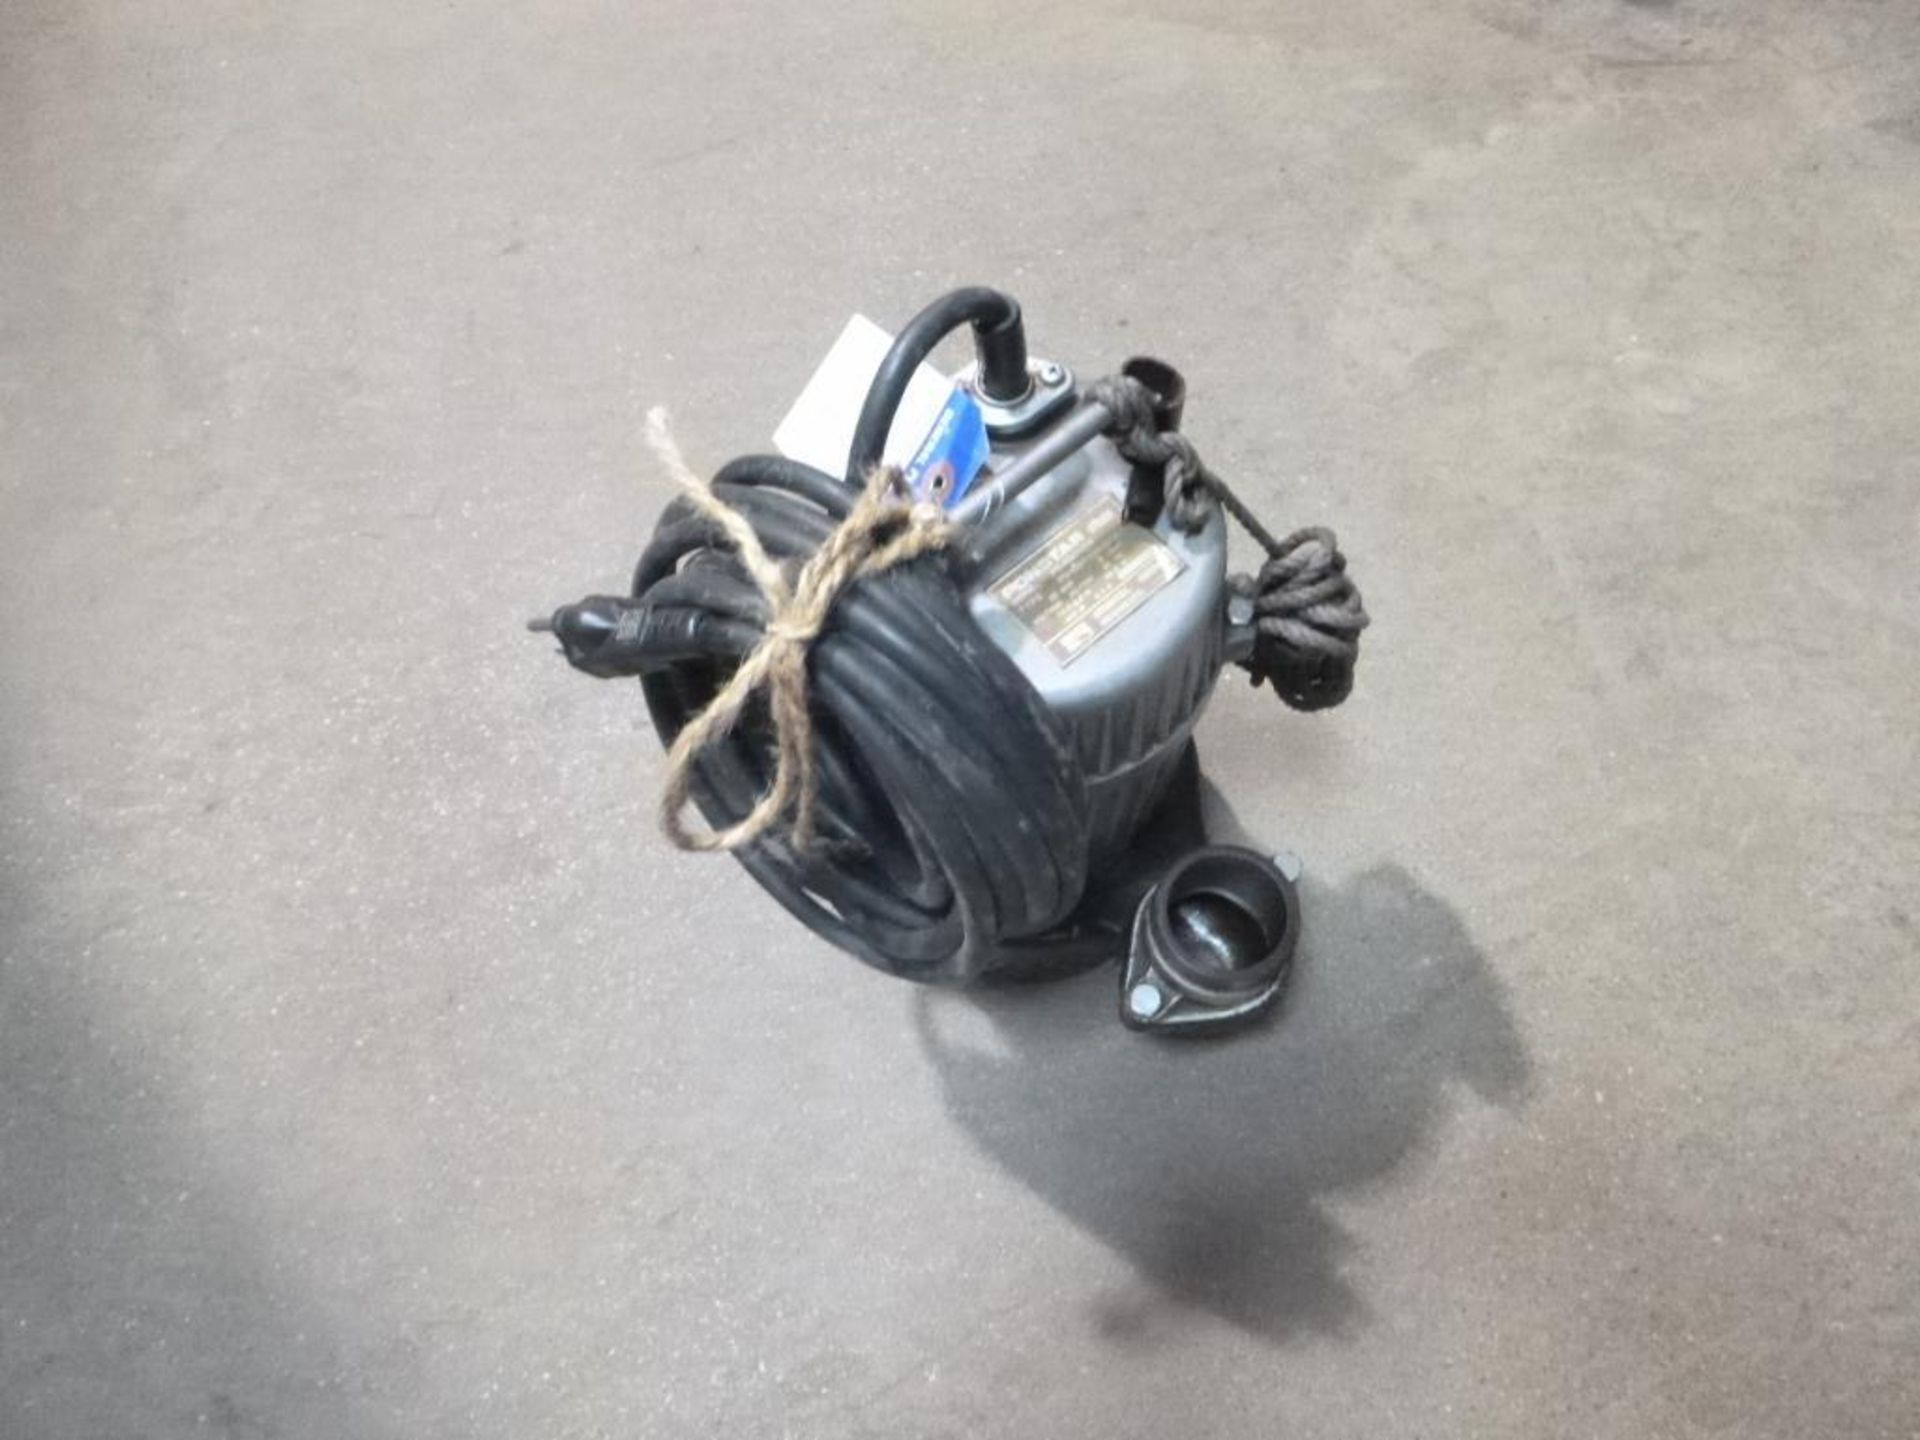 Koshin PX65011 Submersible Pump, 1-1/2 in. - 2 in., , Approx. 7500 GPH - Image 2 of 6